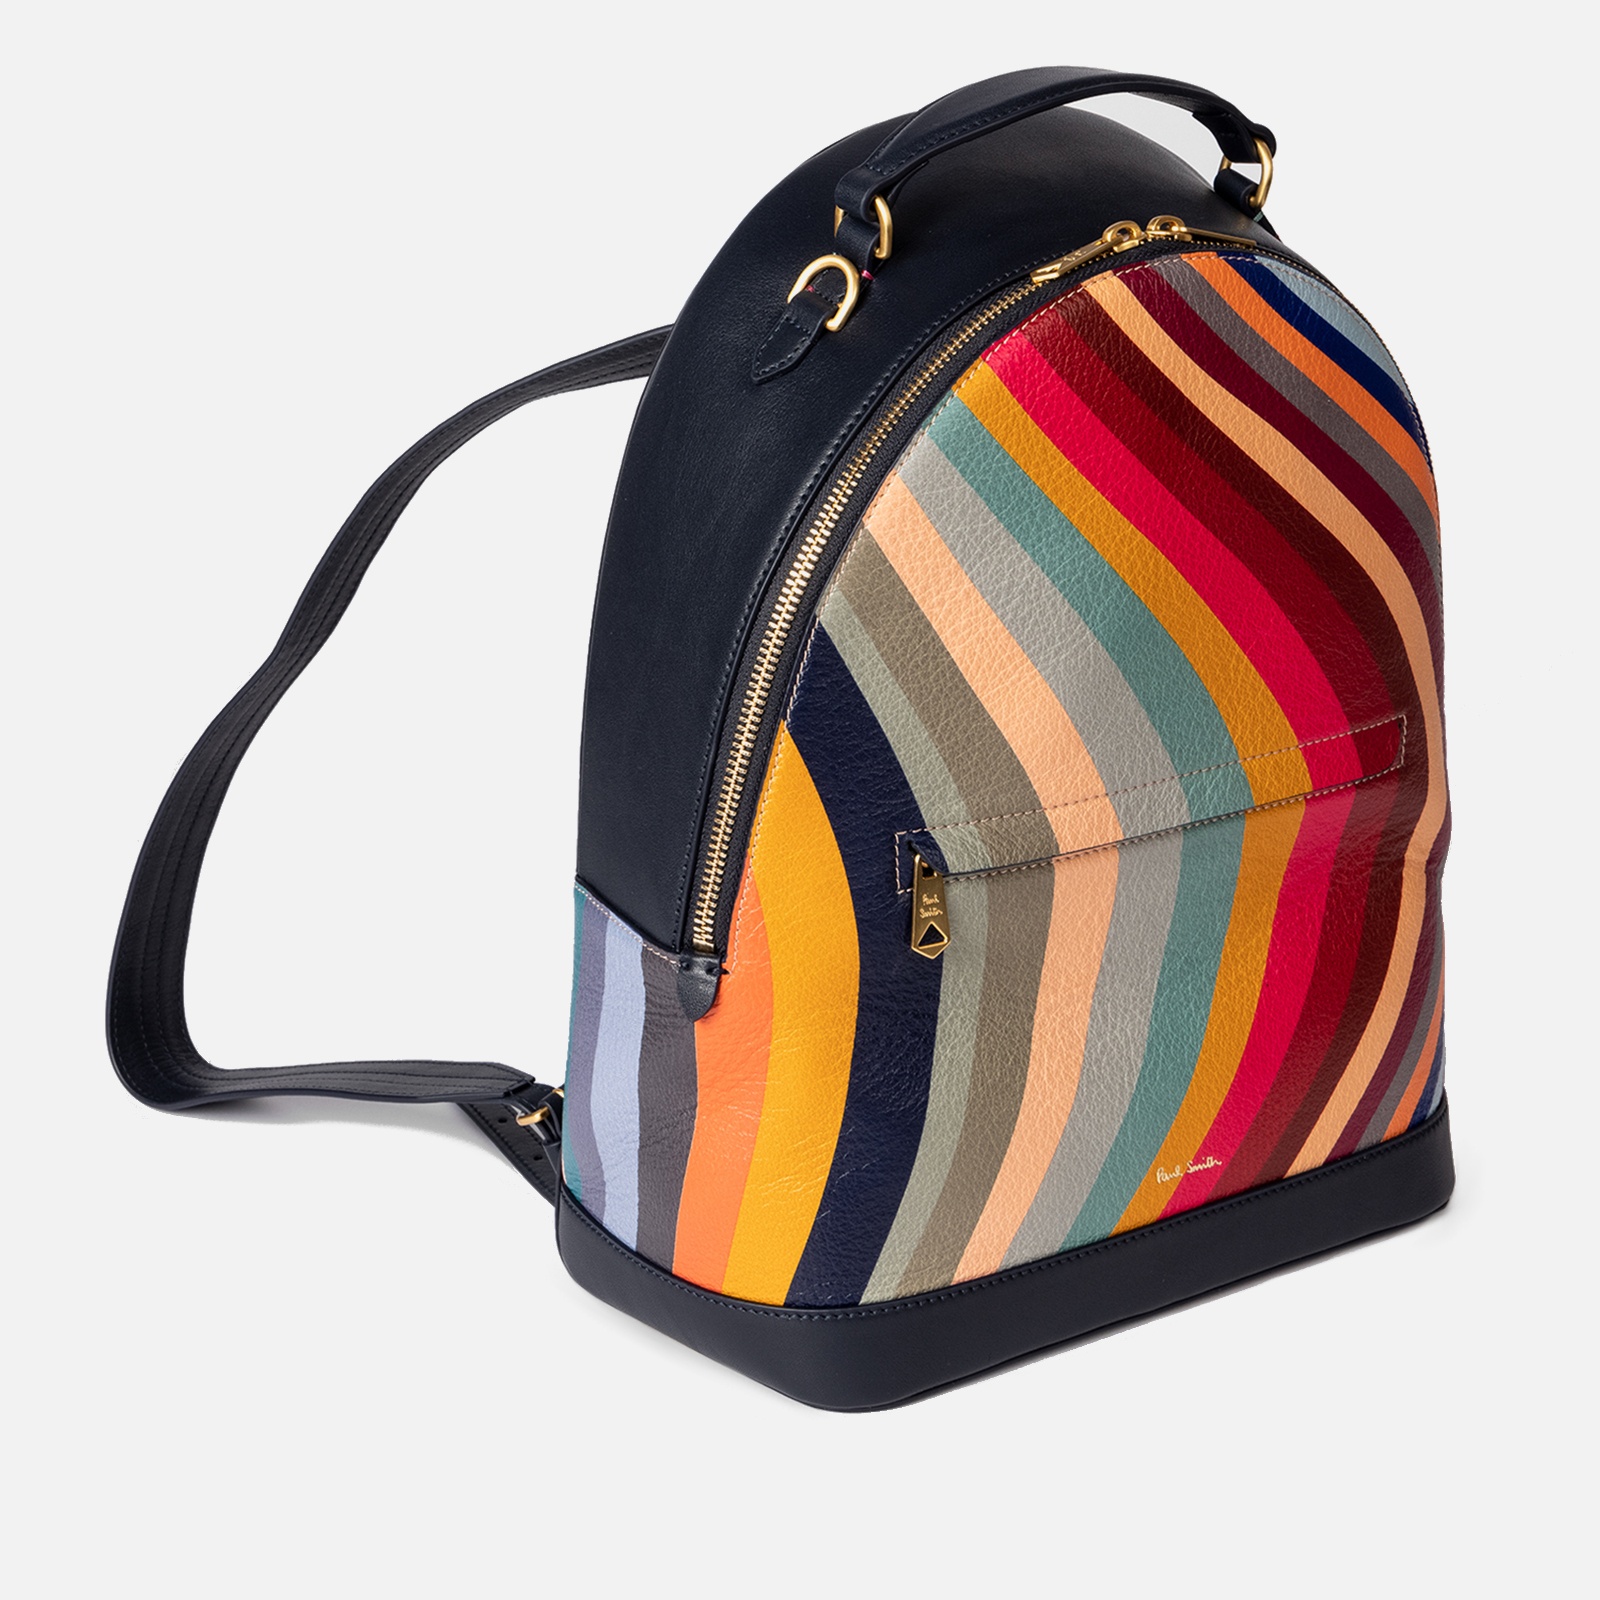 Paul Smith Swirl Striped Leather Backpack - 2